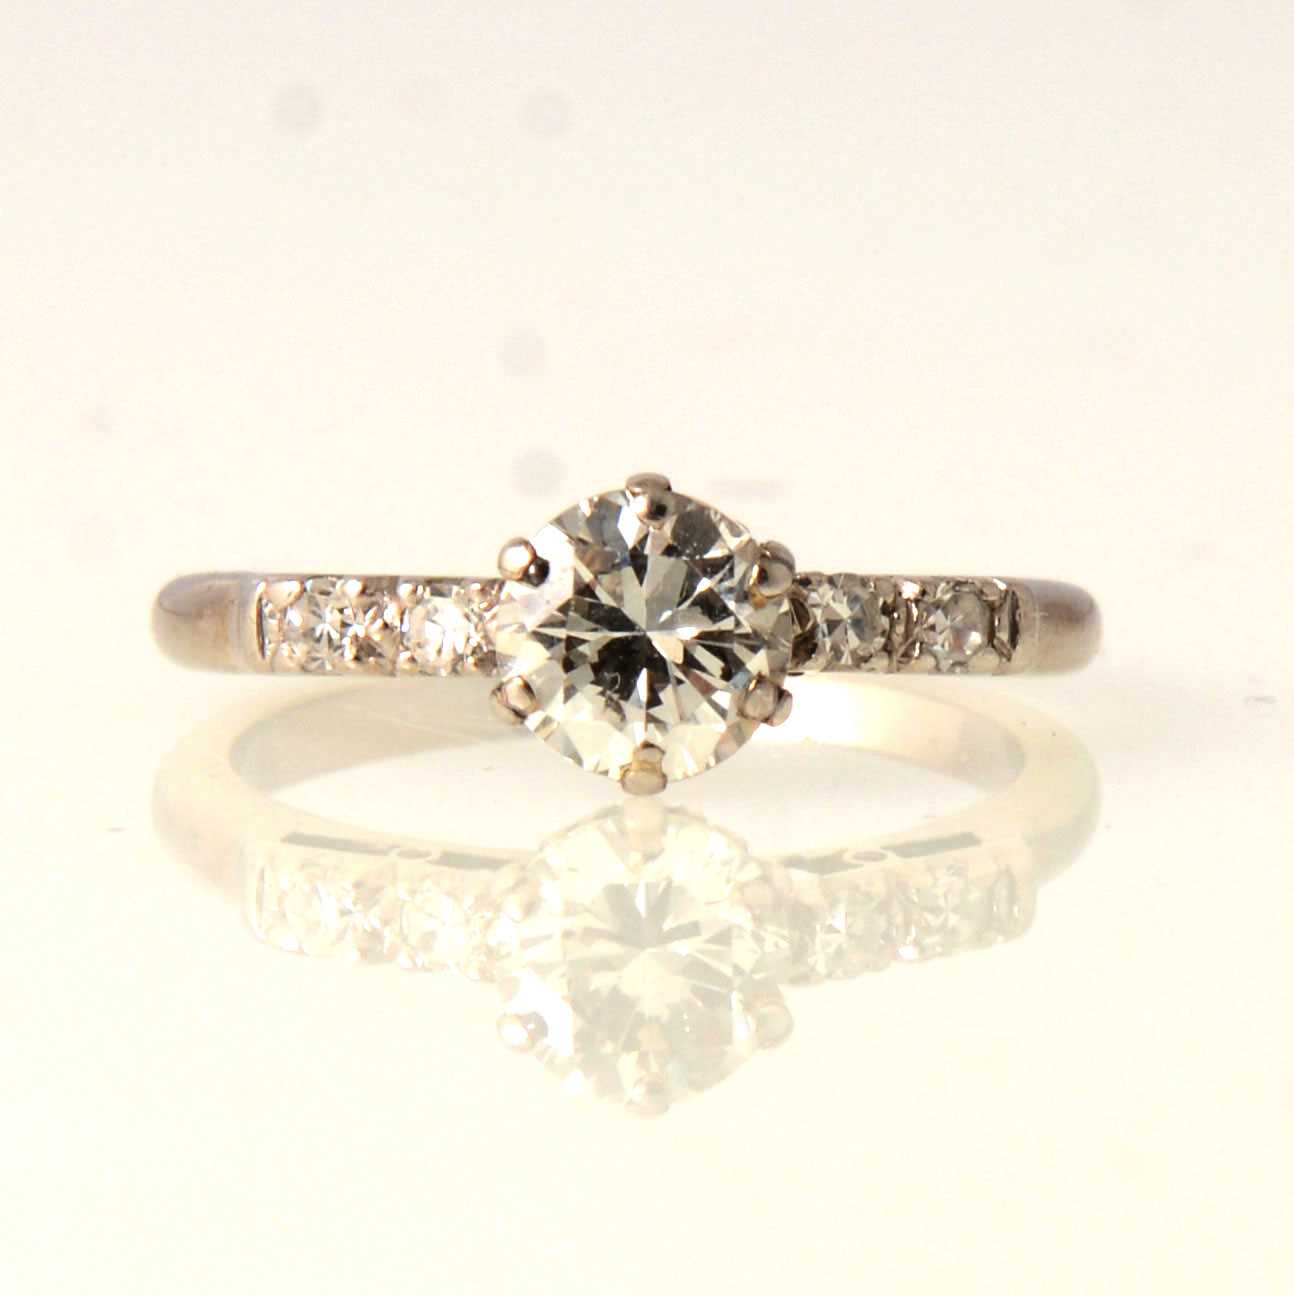 Lot 58 - A diamond solitaire ring with diamond shoulders.